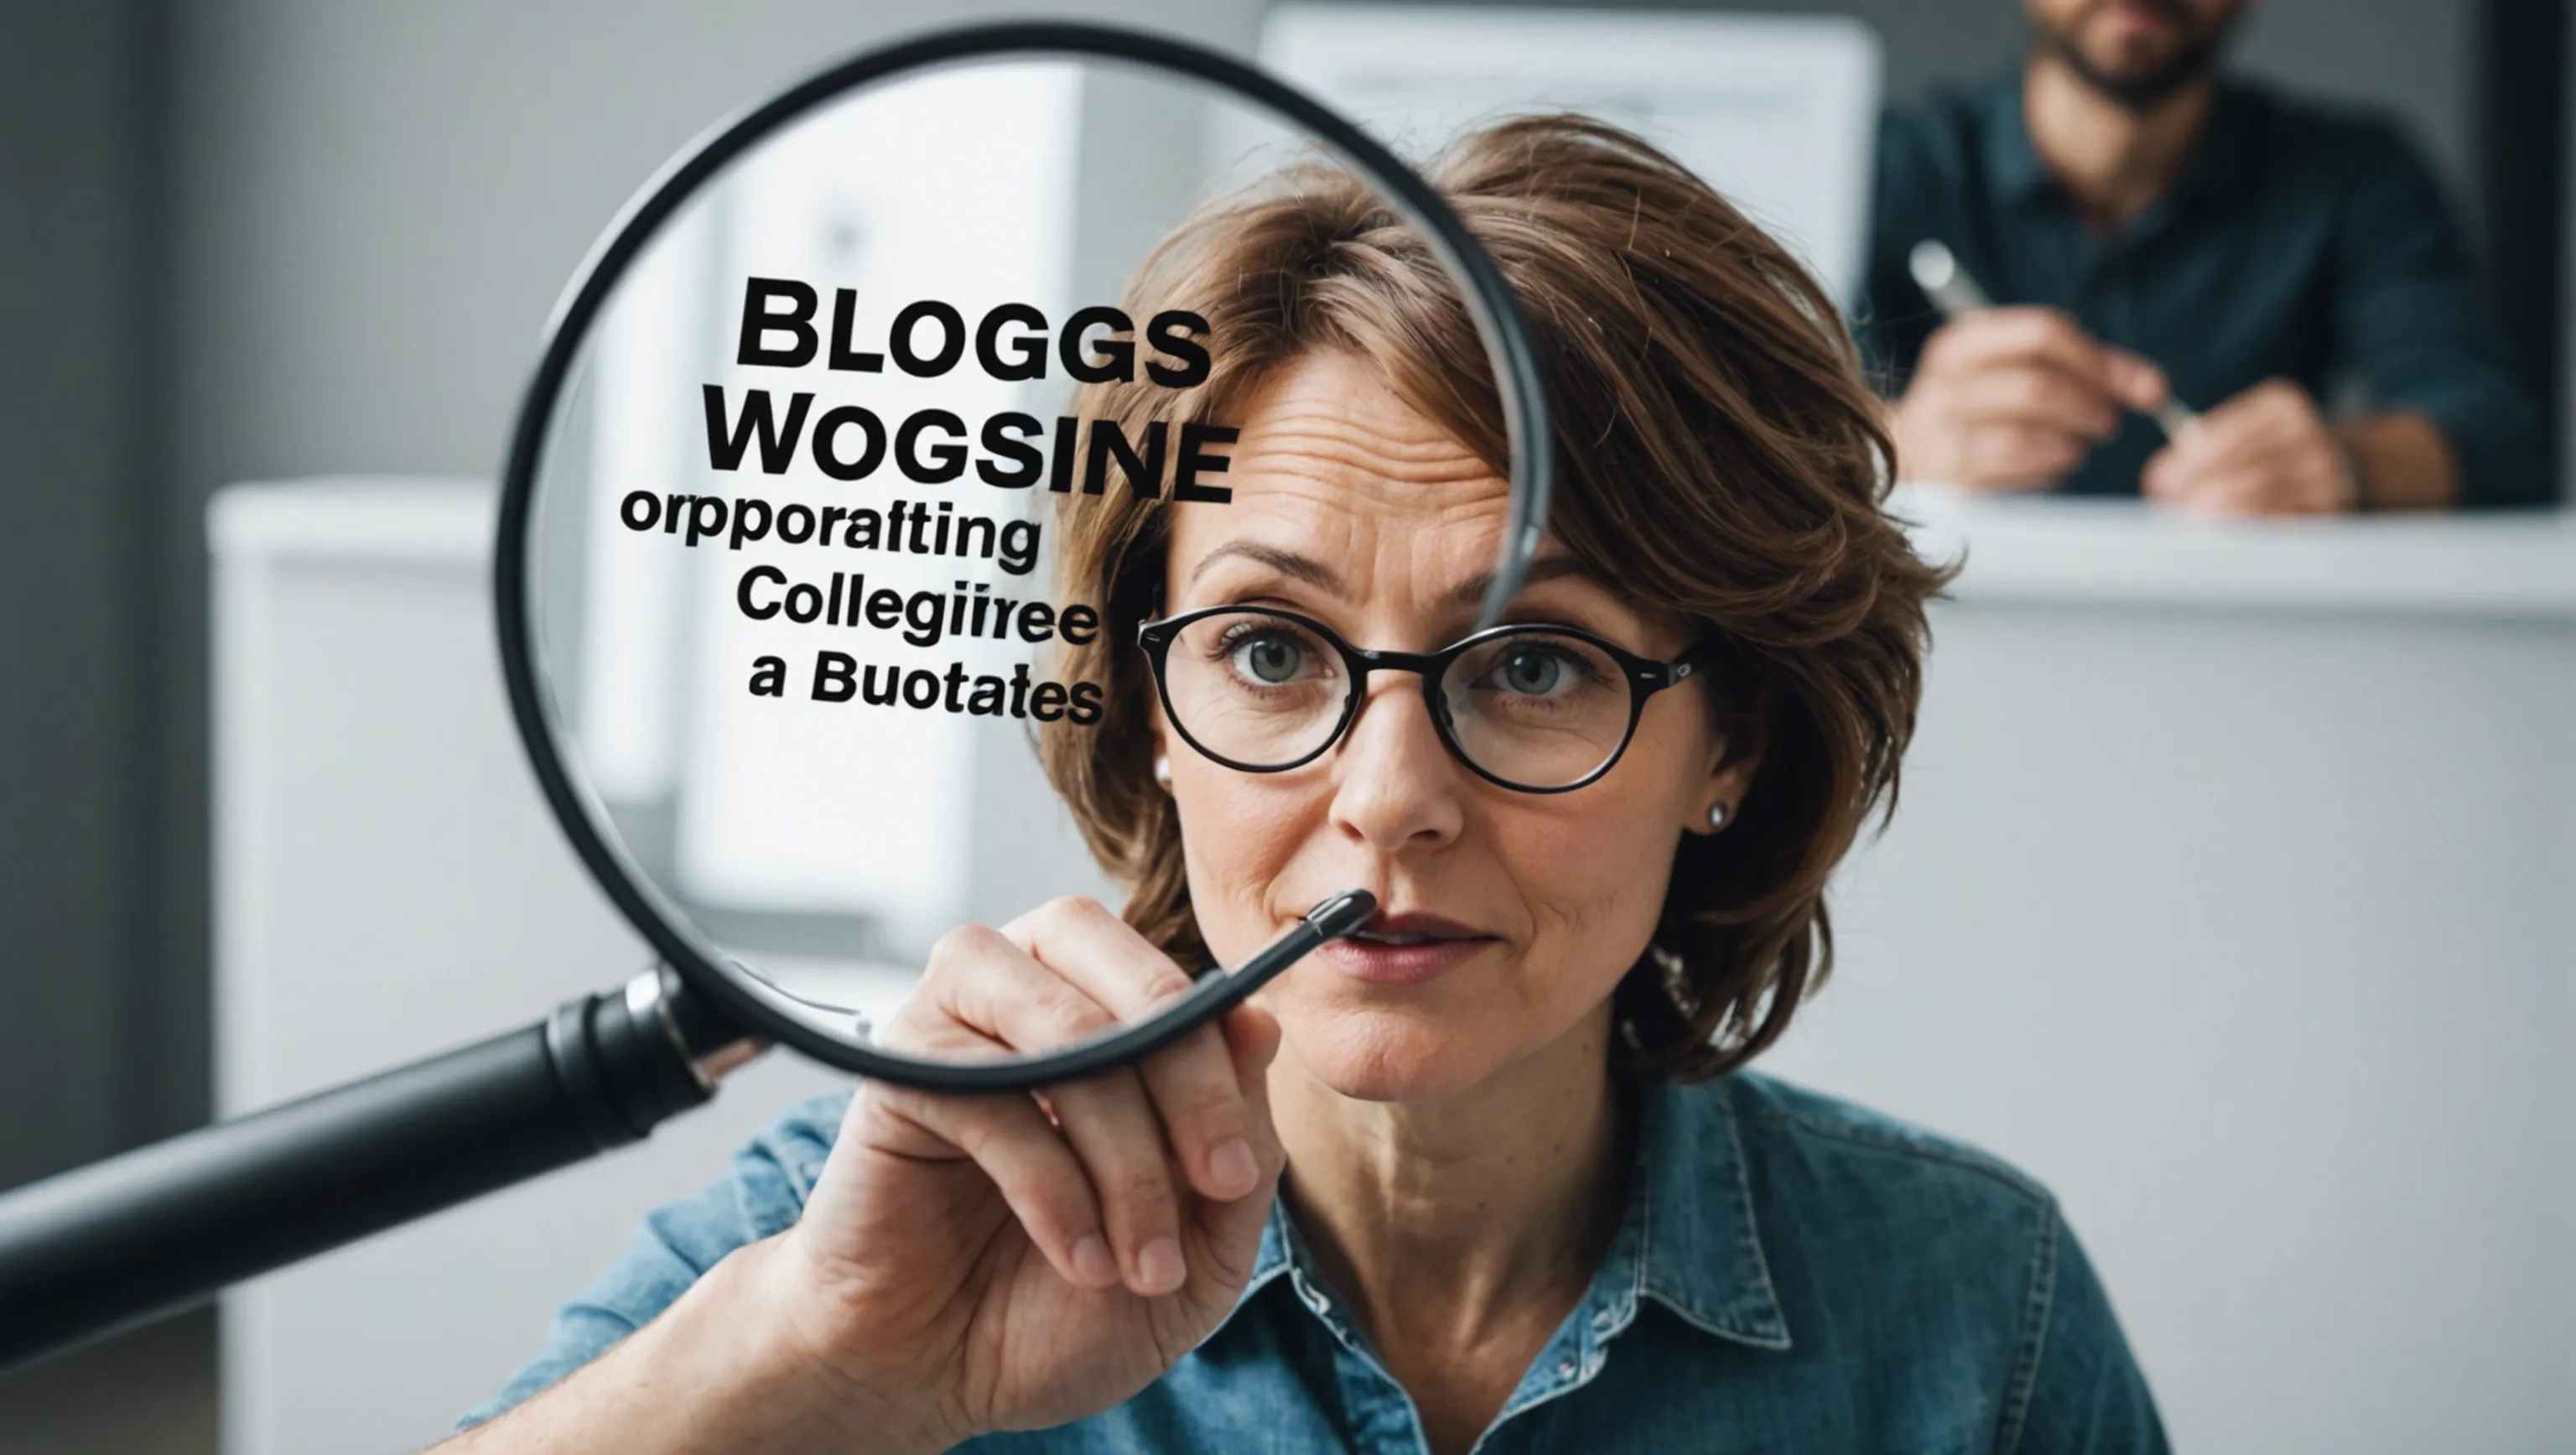 Finding the right guest blogging opportunities